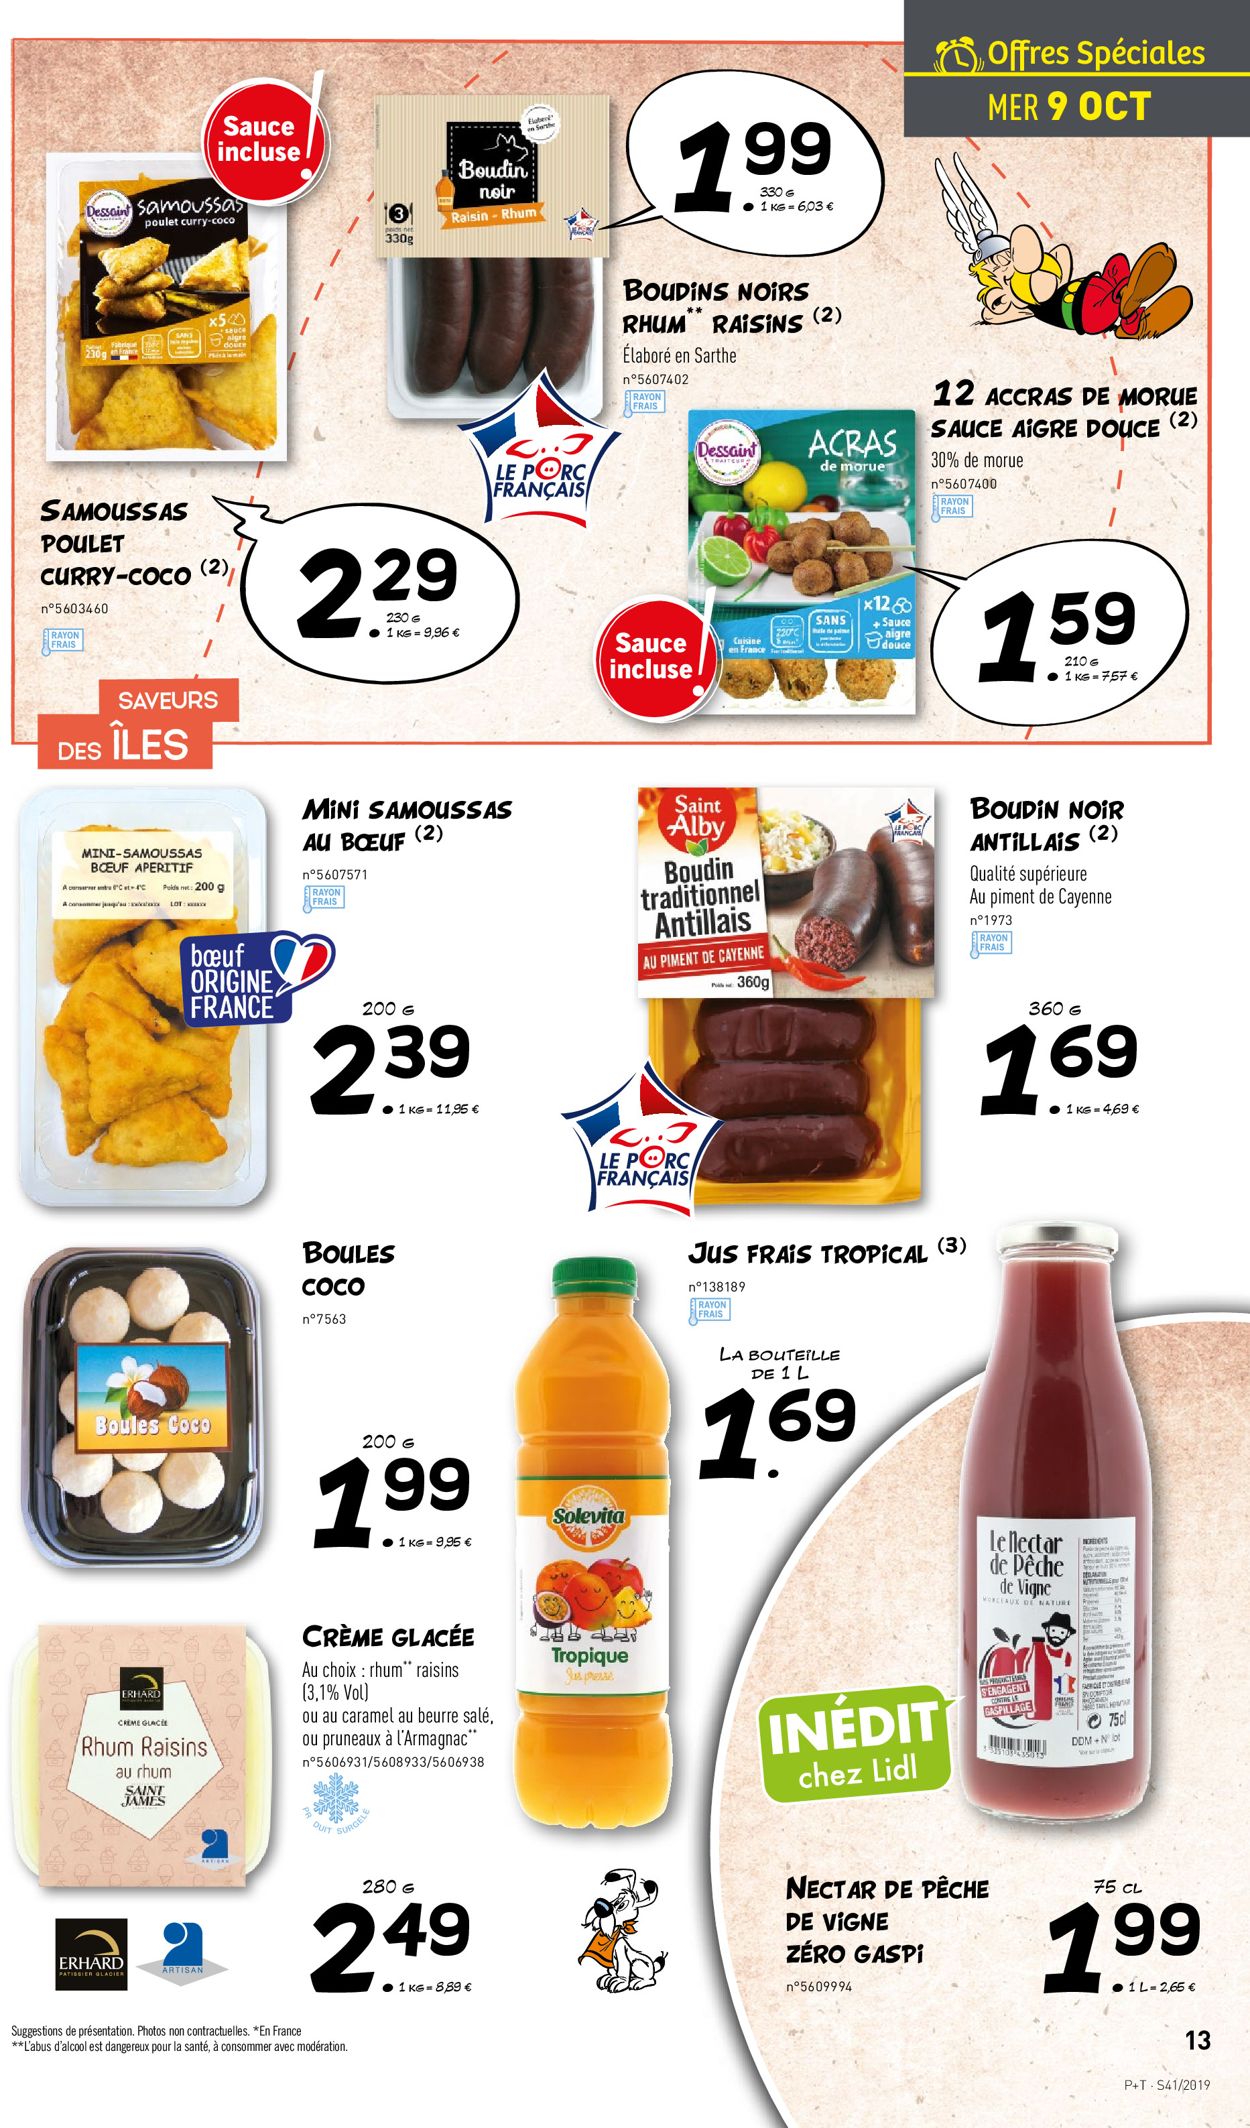 Lidl Catalogue - 09.10-15.10.2019 (Page 13)